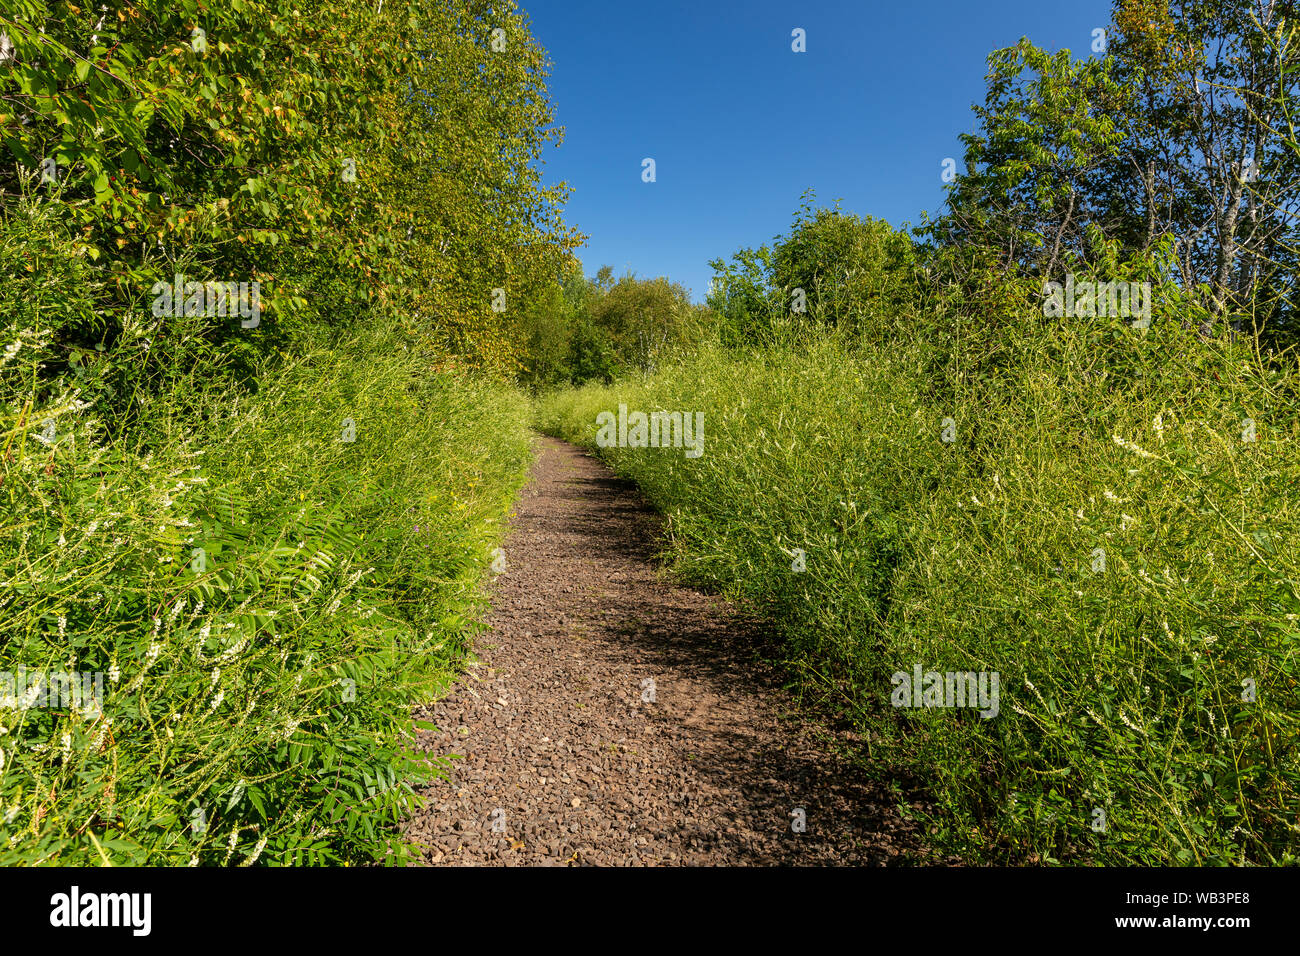 Hiking Trail In The Woods On Former Railroad Line Stock Photo